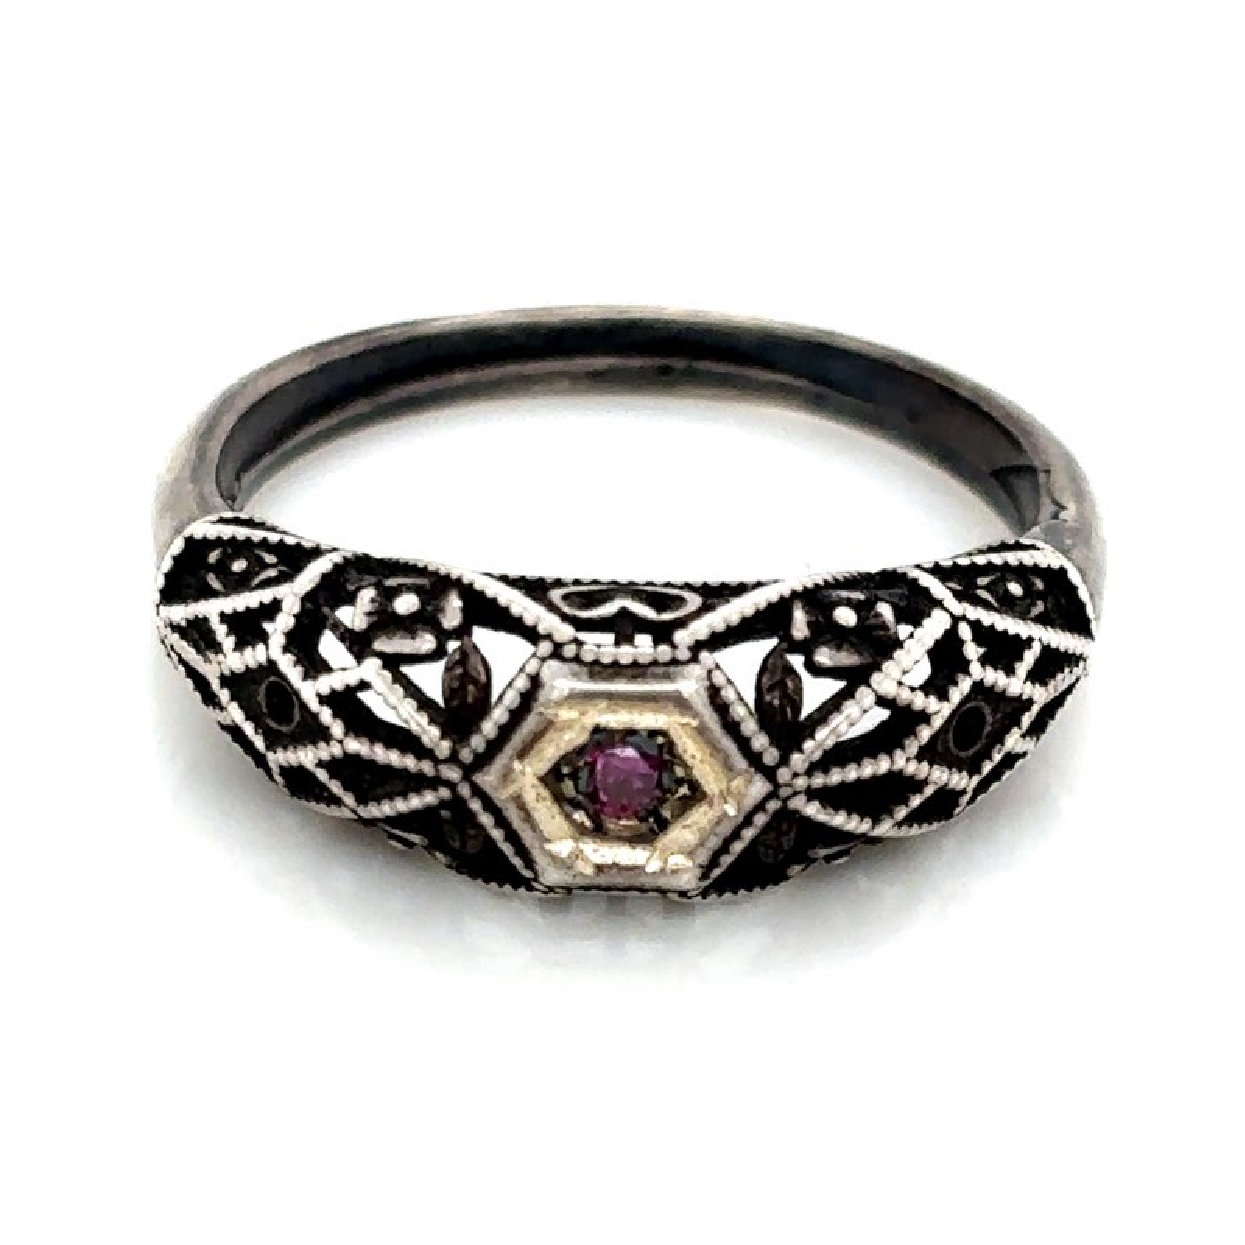 Victorian Sterling Silver Pink Diamond Ring with Filigree Details

Size 6.75